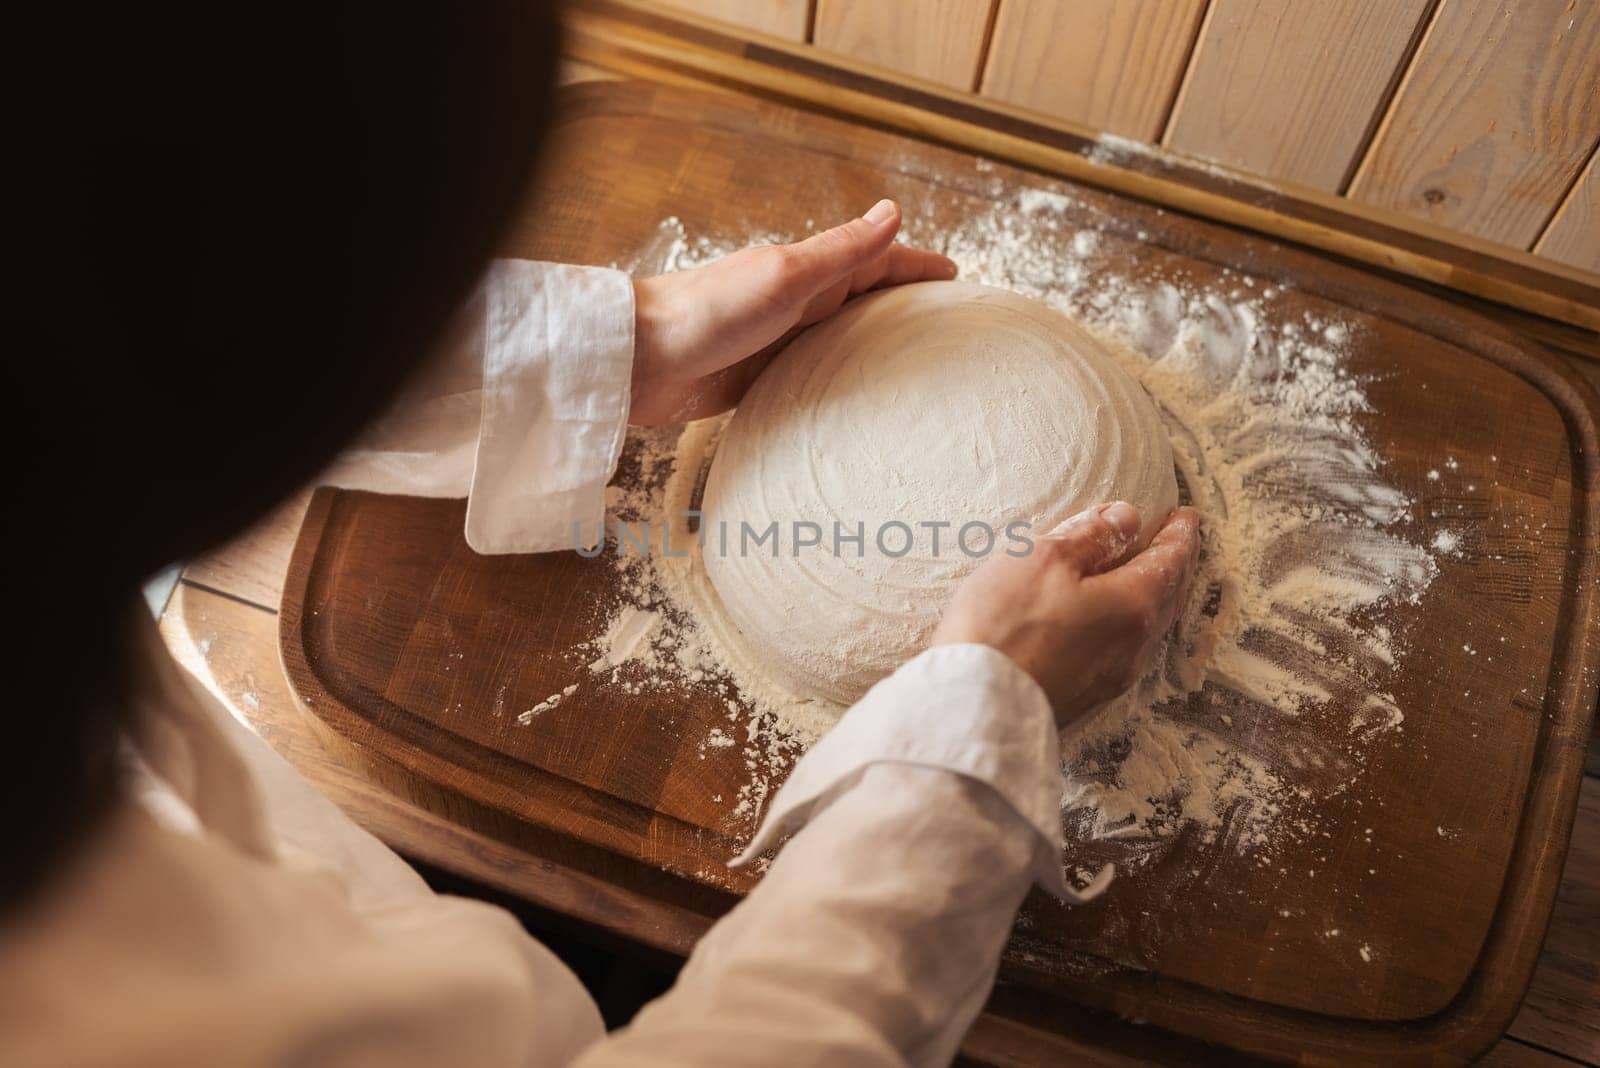 Female baker rubbing flour to the bread dough before baking it in the oven